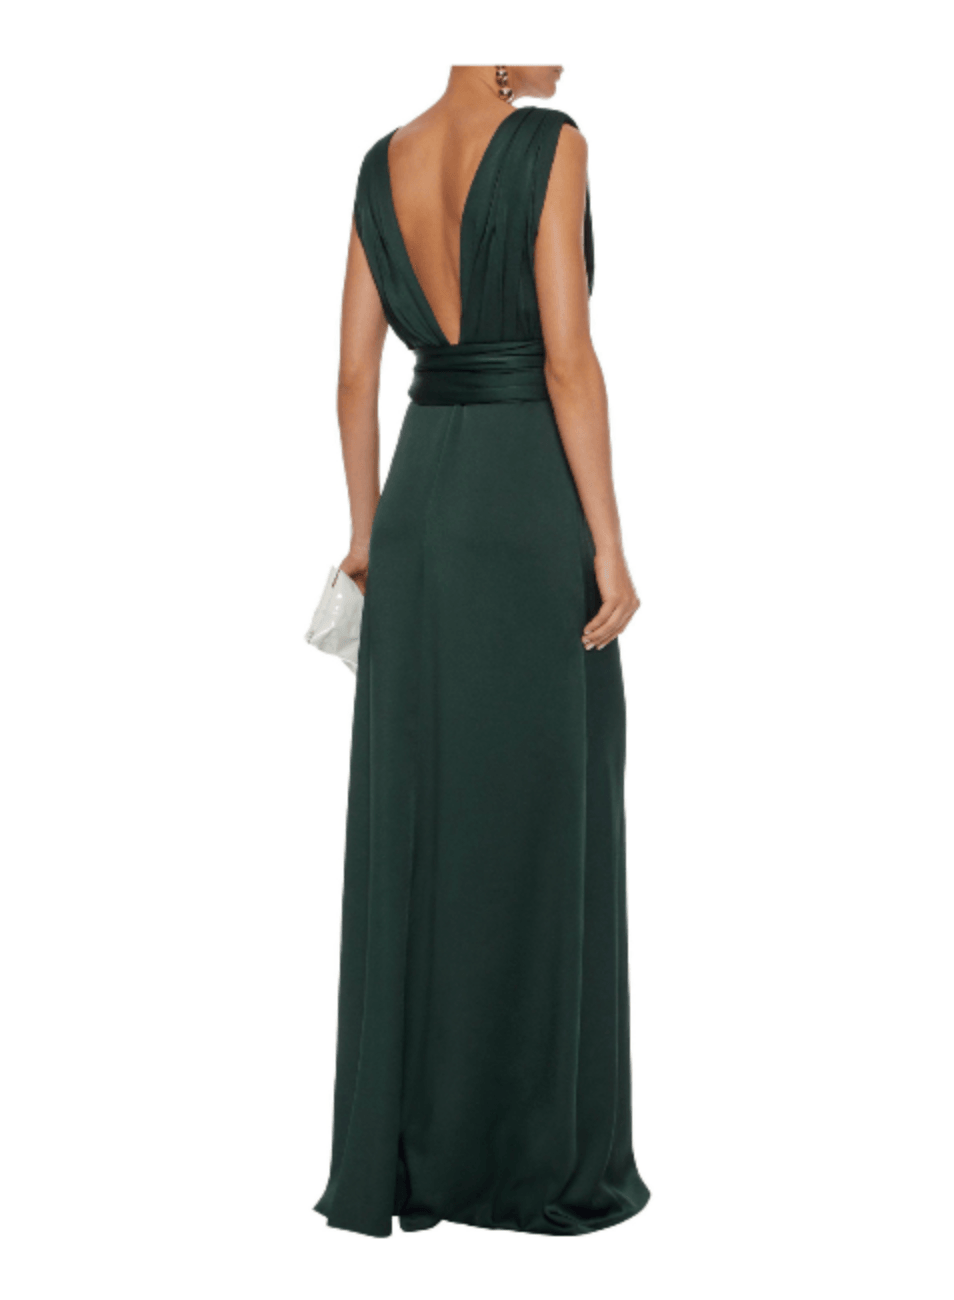 FOREST GREEN DRAPED SATIN GOWN - codressing